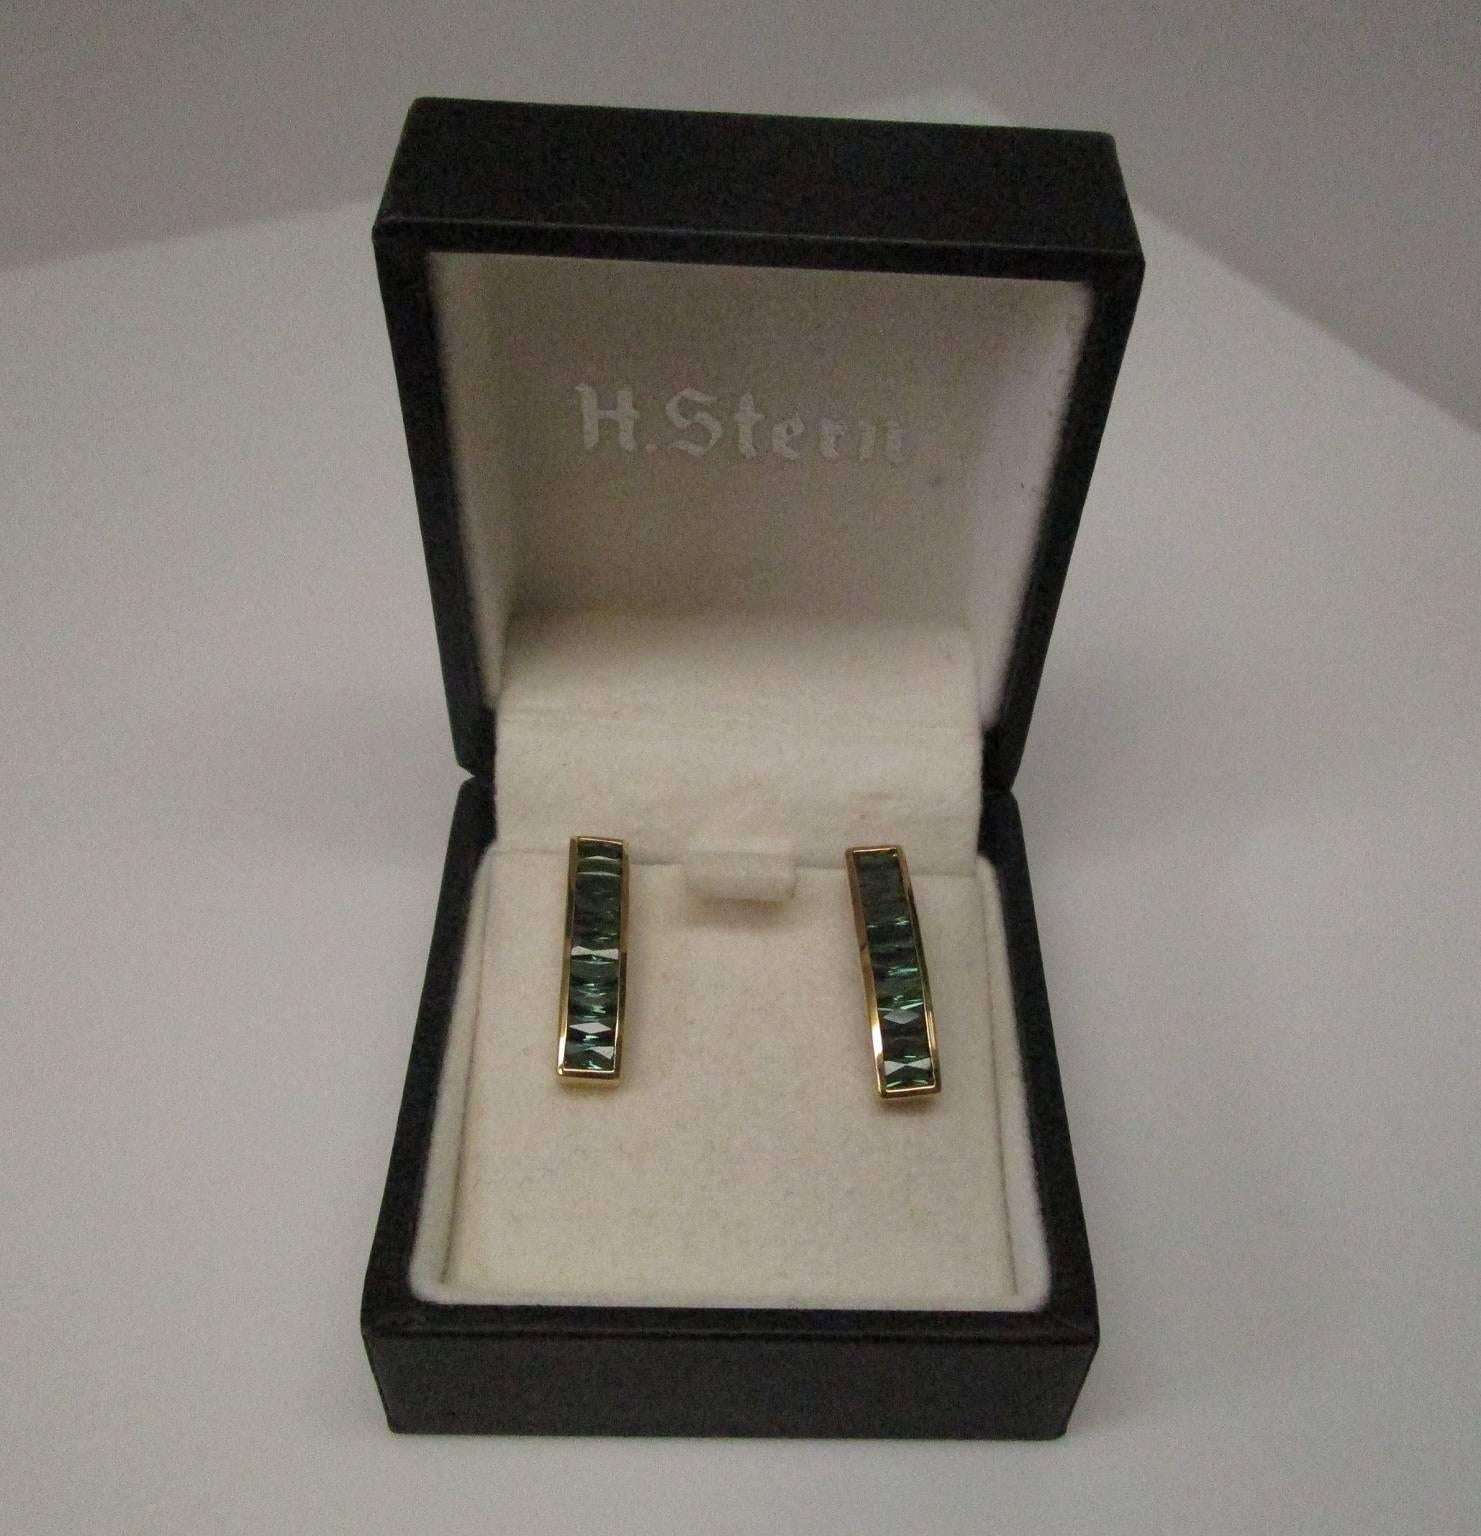 These are a stunning pair of 18 K yellow gold earrings featuring tourmaline baguettes. They were made by H. Stern and are in the original box. The simple design makes them perfect for the office and the shine takes them into the night. Very